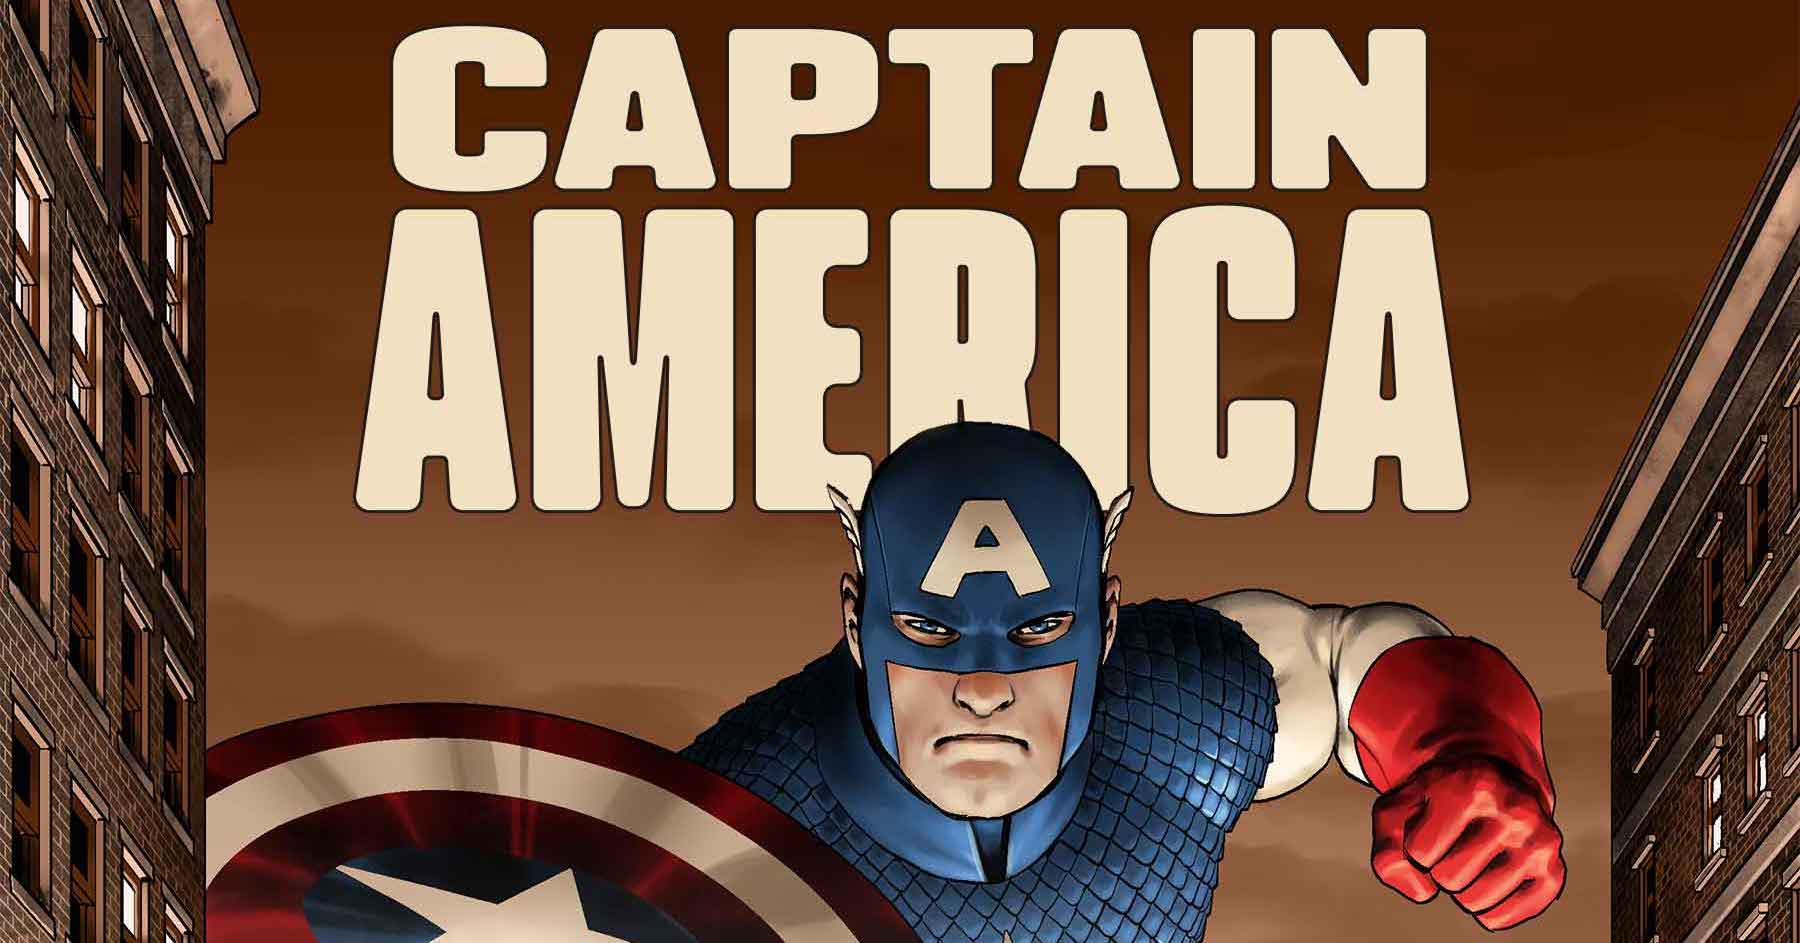 EXCLUSIVE Marvel Preview: Captain America #1